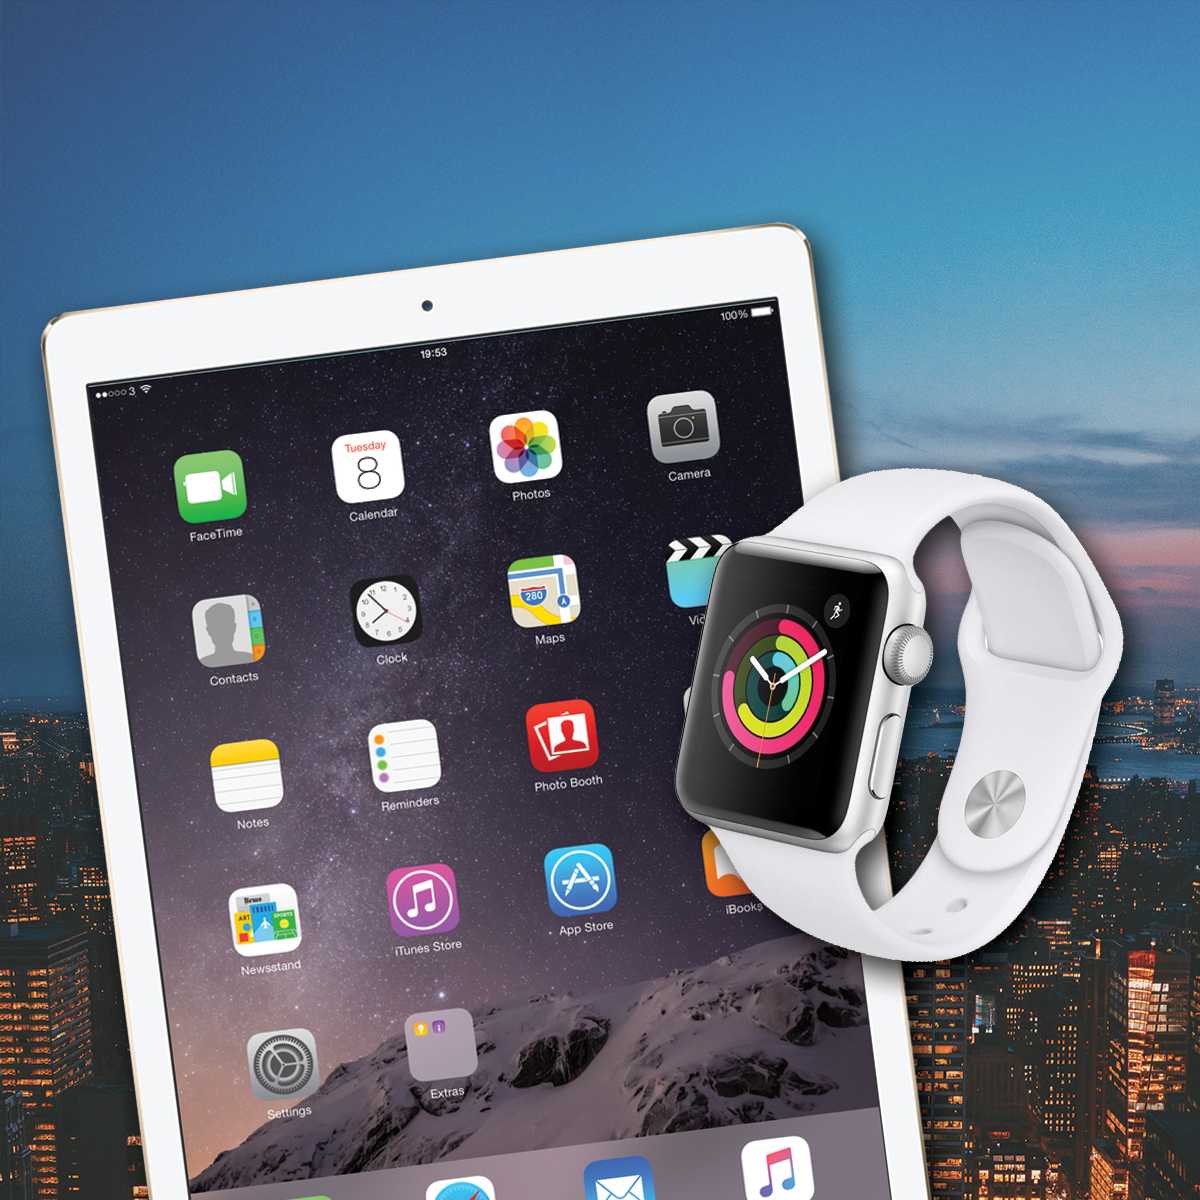 Free iPad & Apple Watch offered through valid Licensure Assistance Program